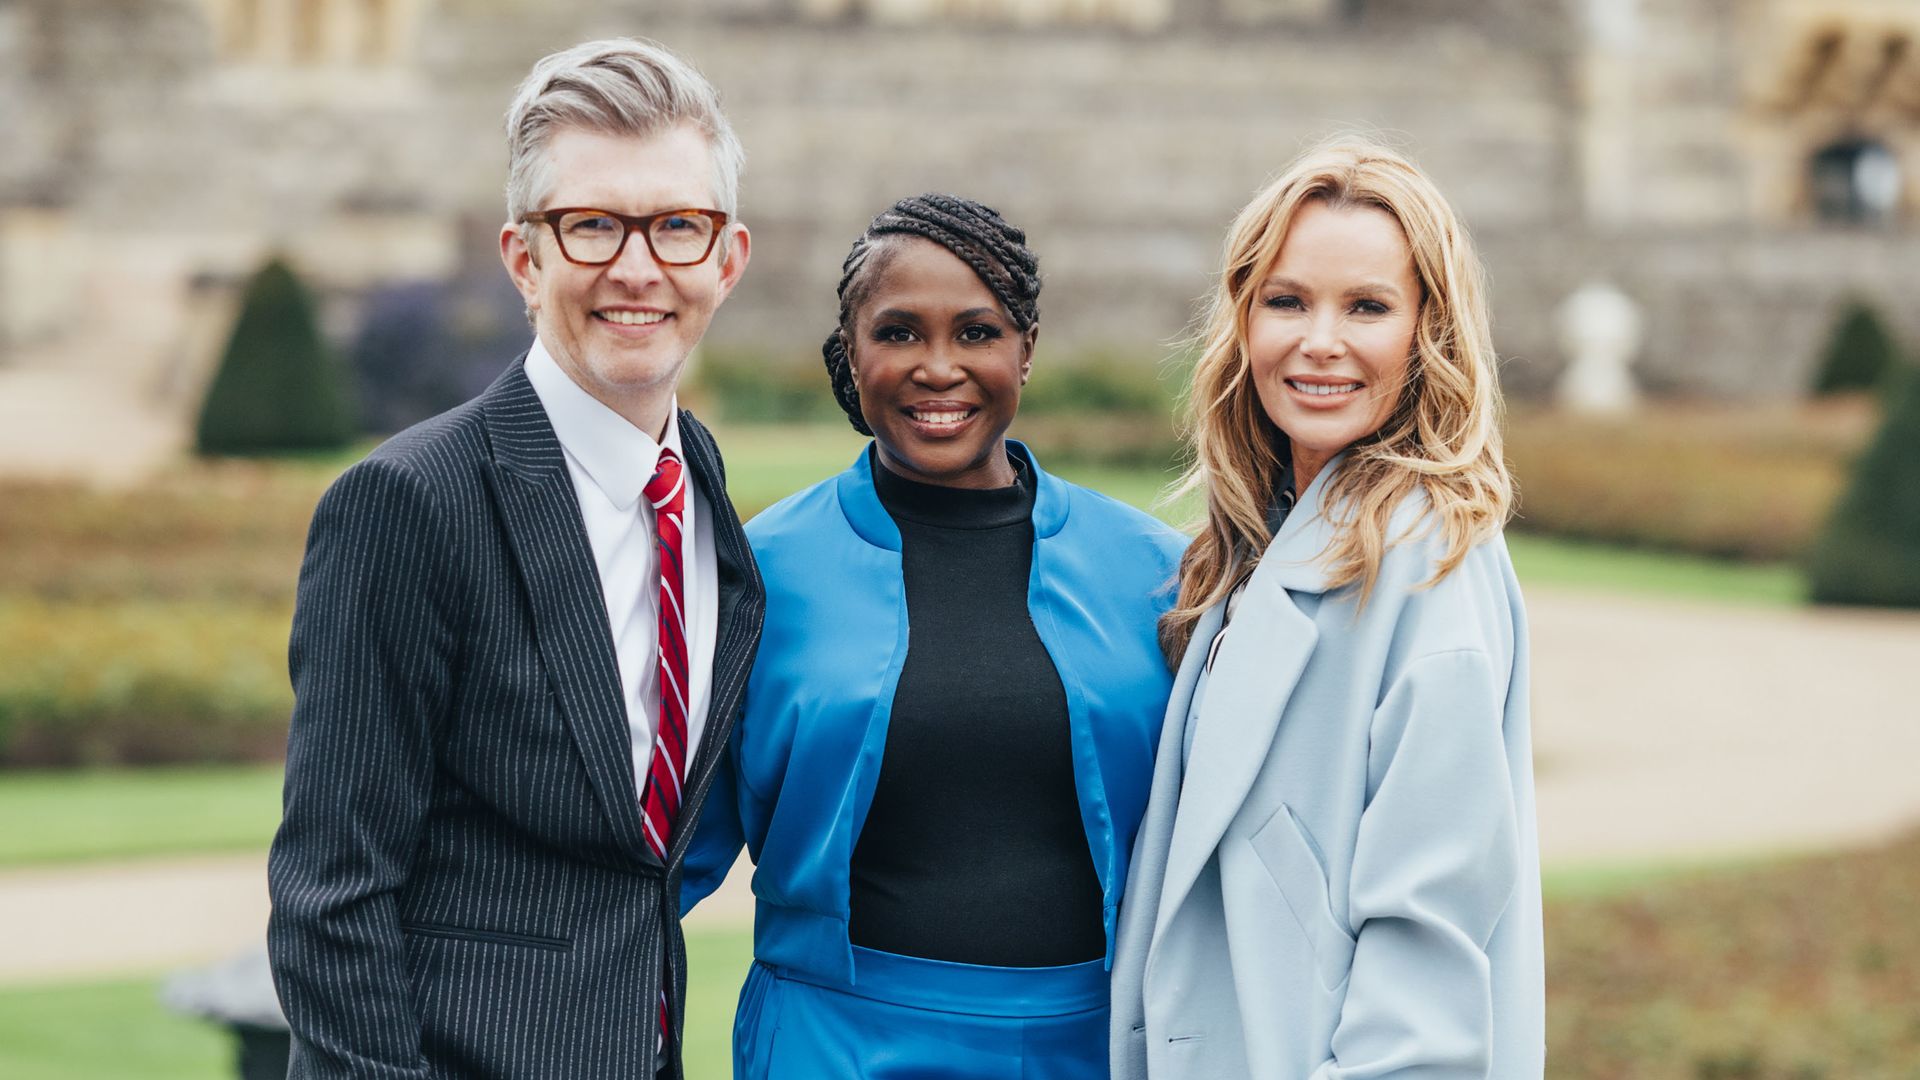 Gareth Malone, Motsi Mabuse and Amanda Holden smiling in the grounds of Windsor Castle